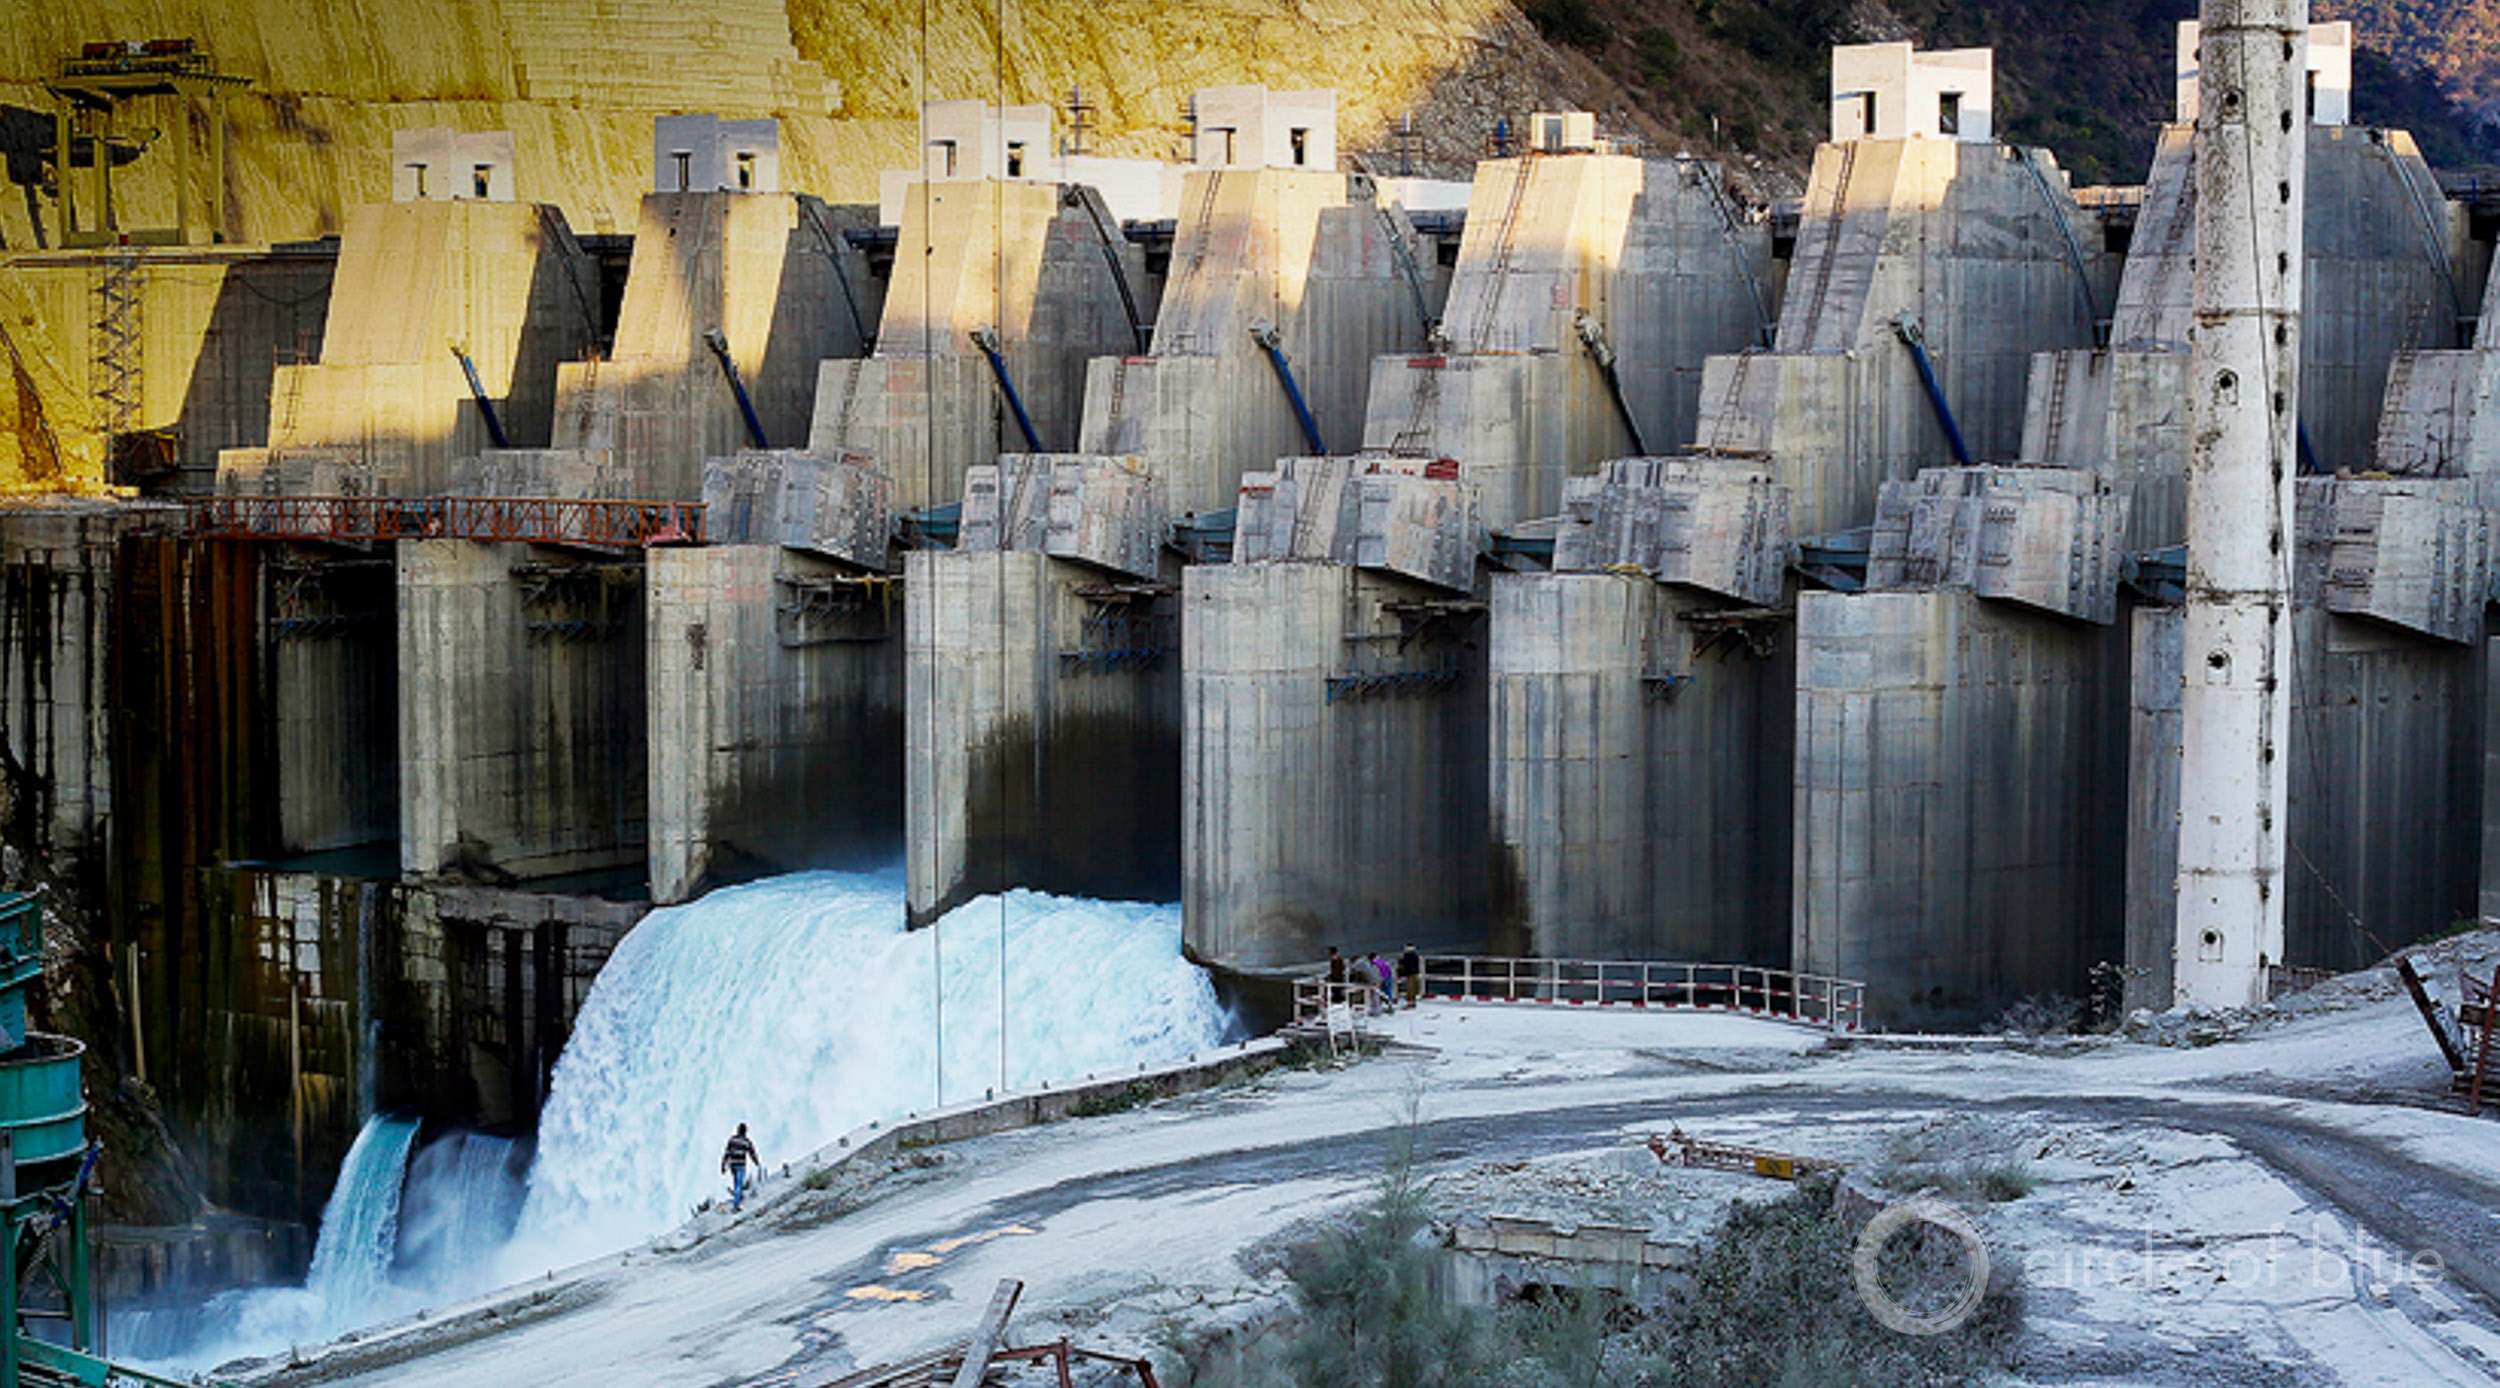 In March 2016 and April 2016, due to severe drought, generation from hydropower projects was 19 percent and 17 percent lower compared to the same months the previous year. Here, a hydropower project in Srinagar, a Himalayan hill city in Uttarakhand. Photo Â© Durham Malhotra